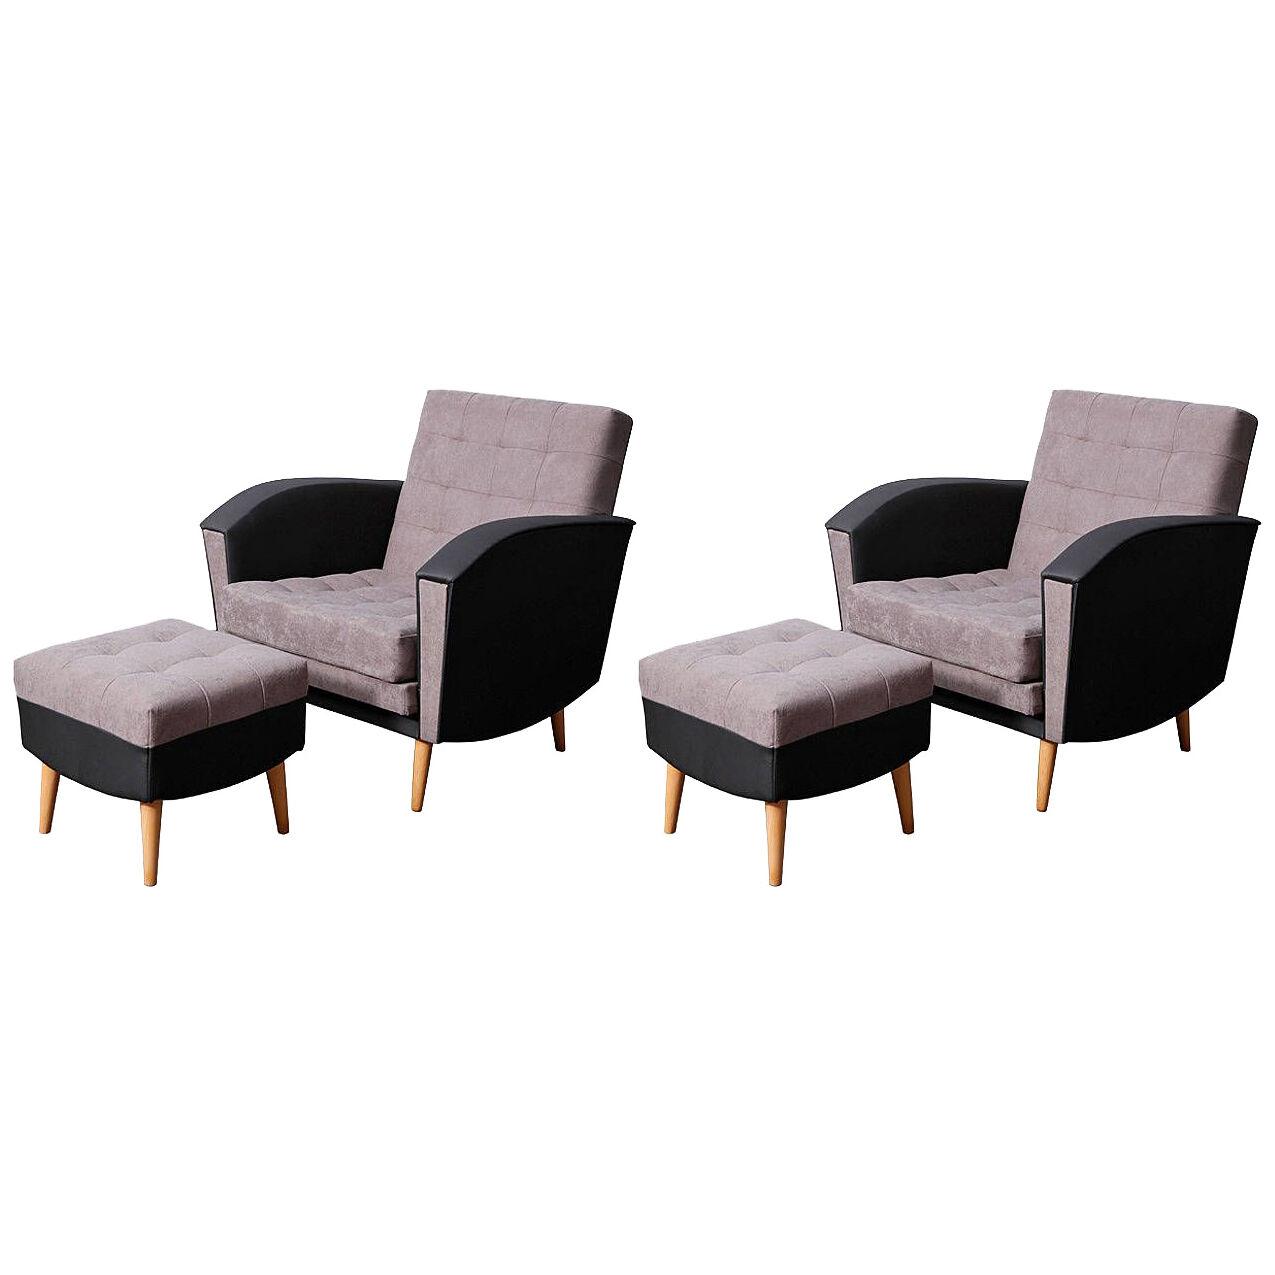 Vintage 1960s black and grey armchairs and ottomans